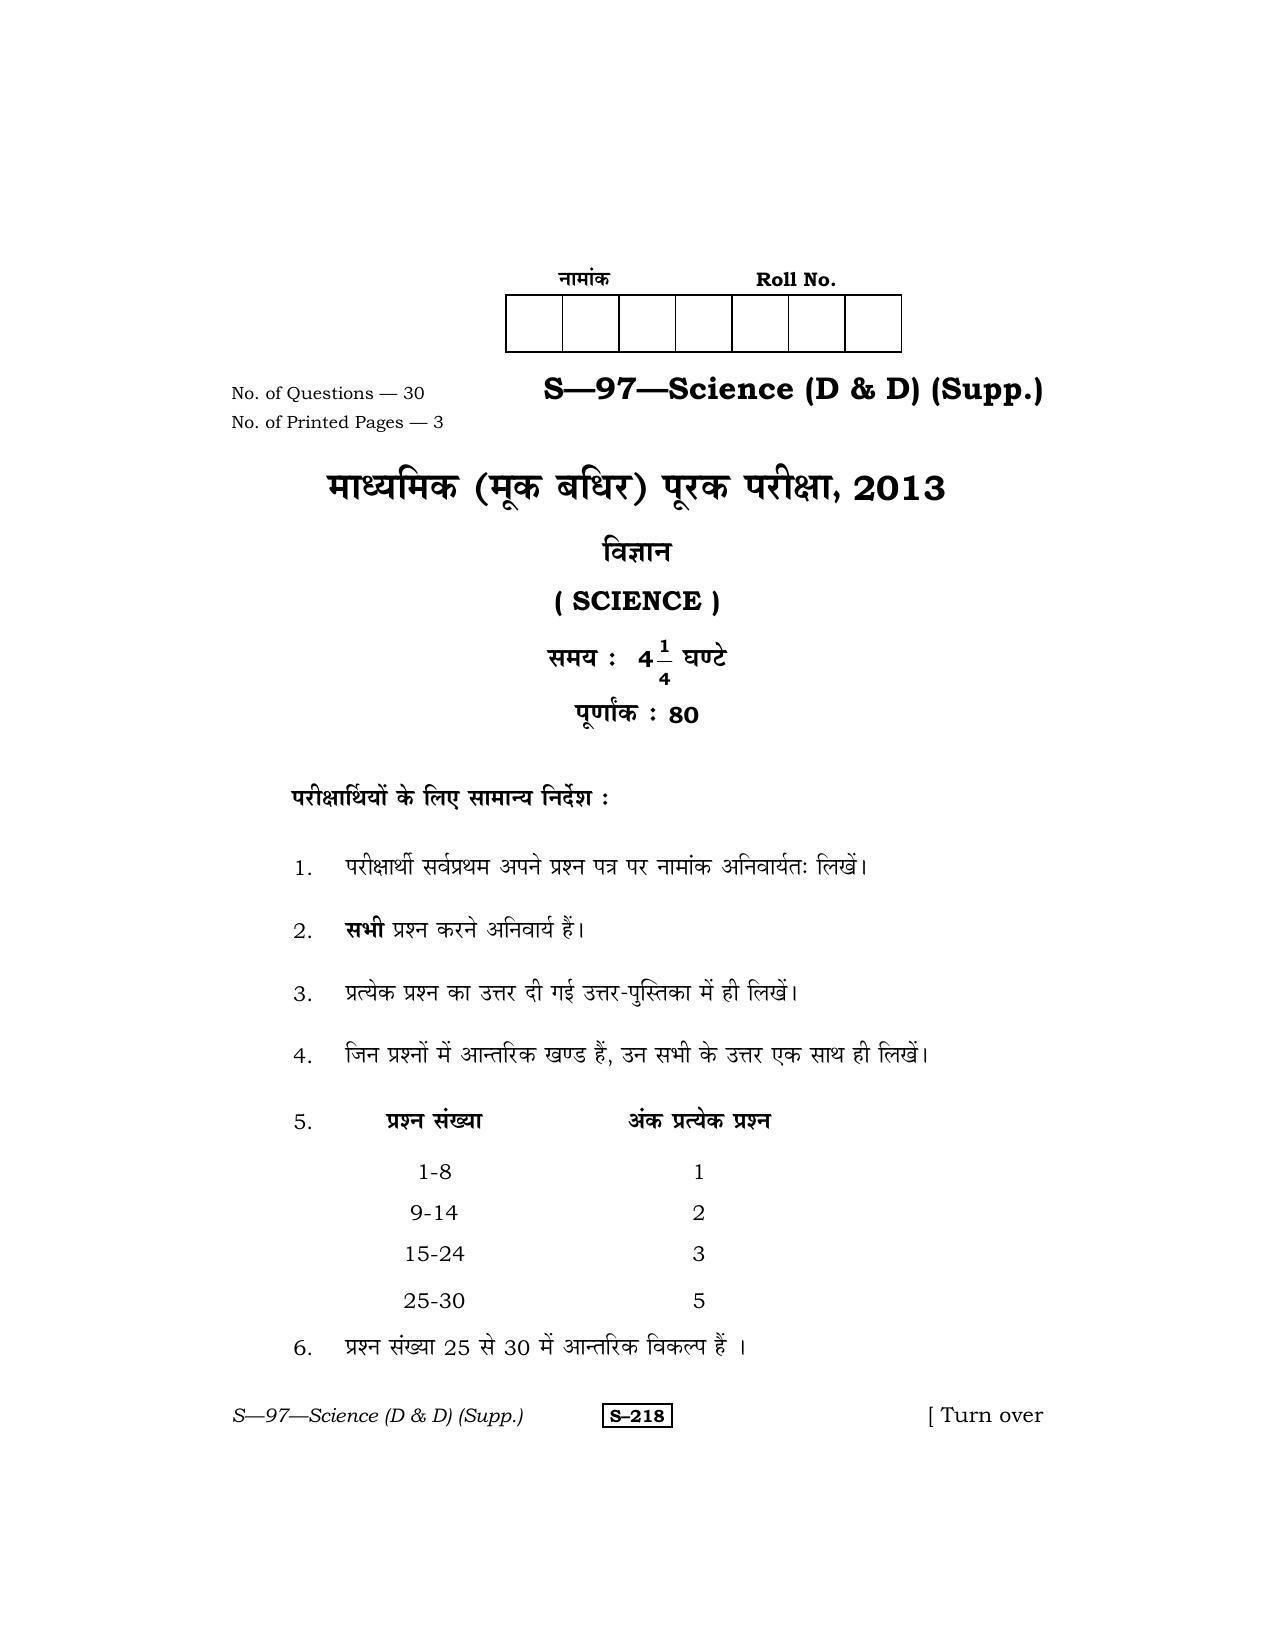 RBSE Class 10 Science (D & D) (Supp.) 2013 Question Paper - Page 1